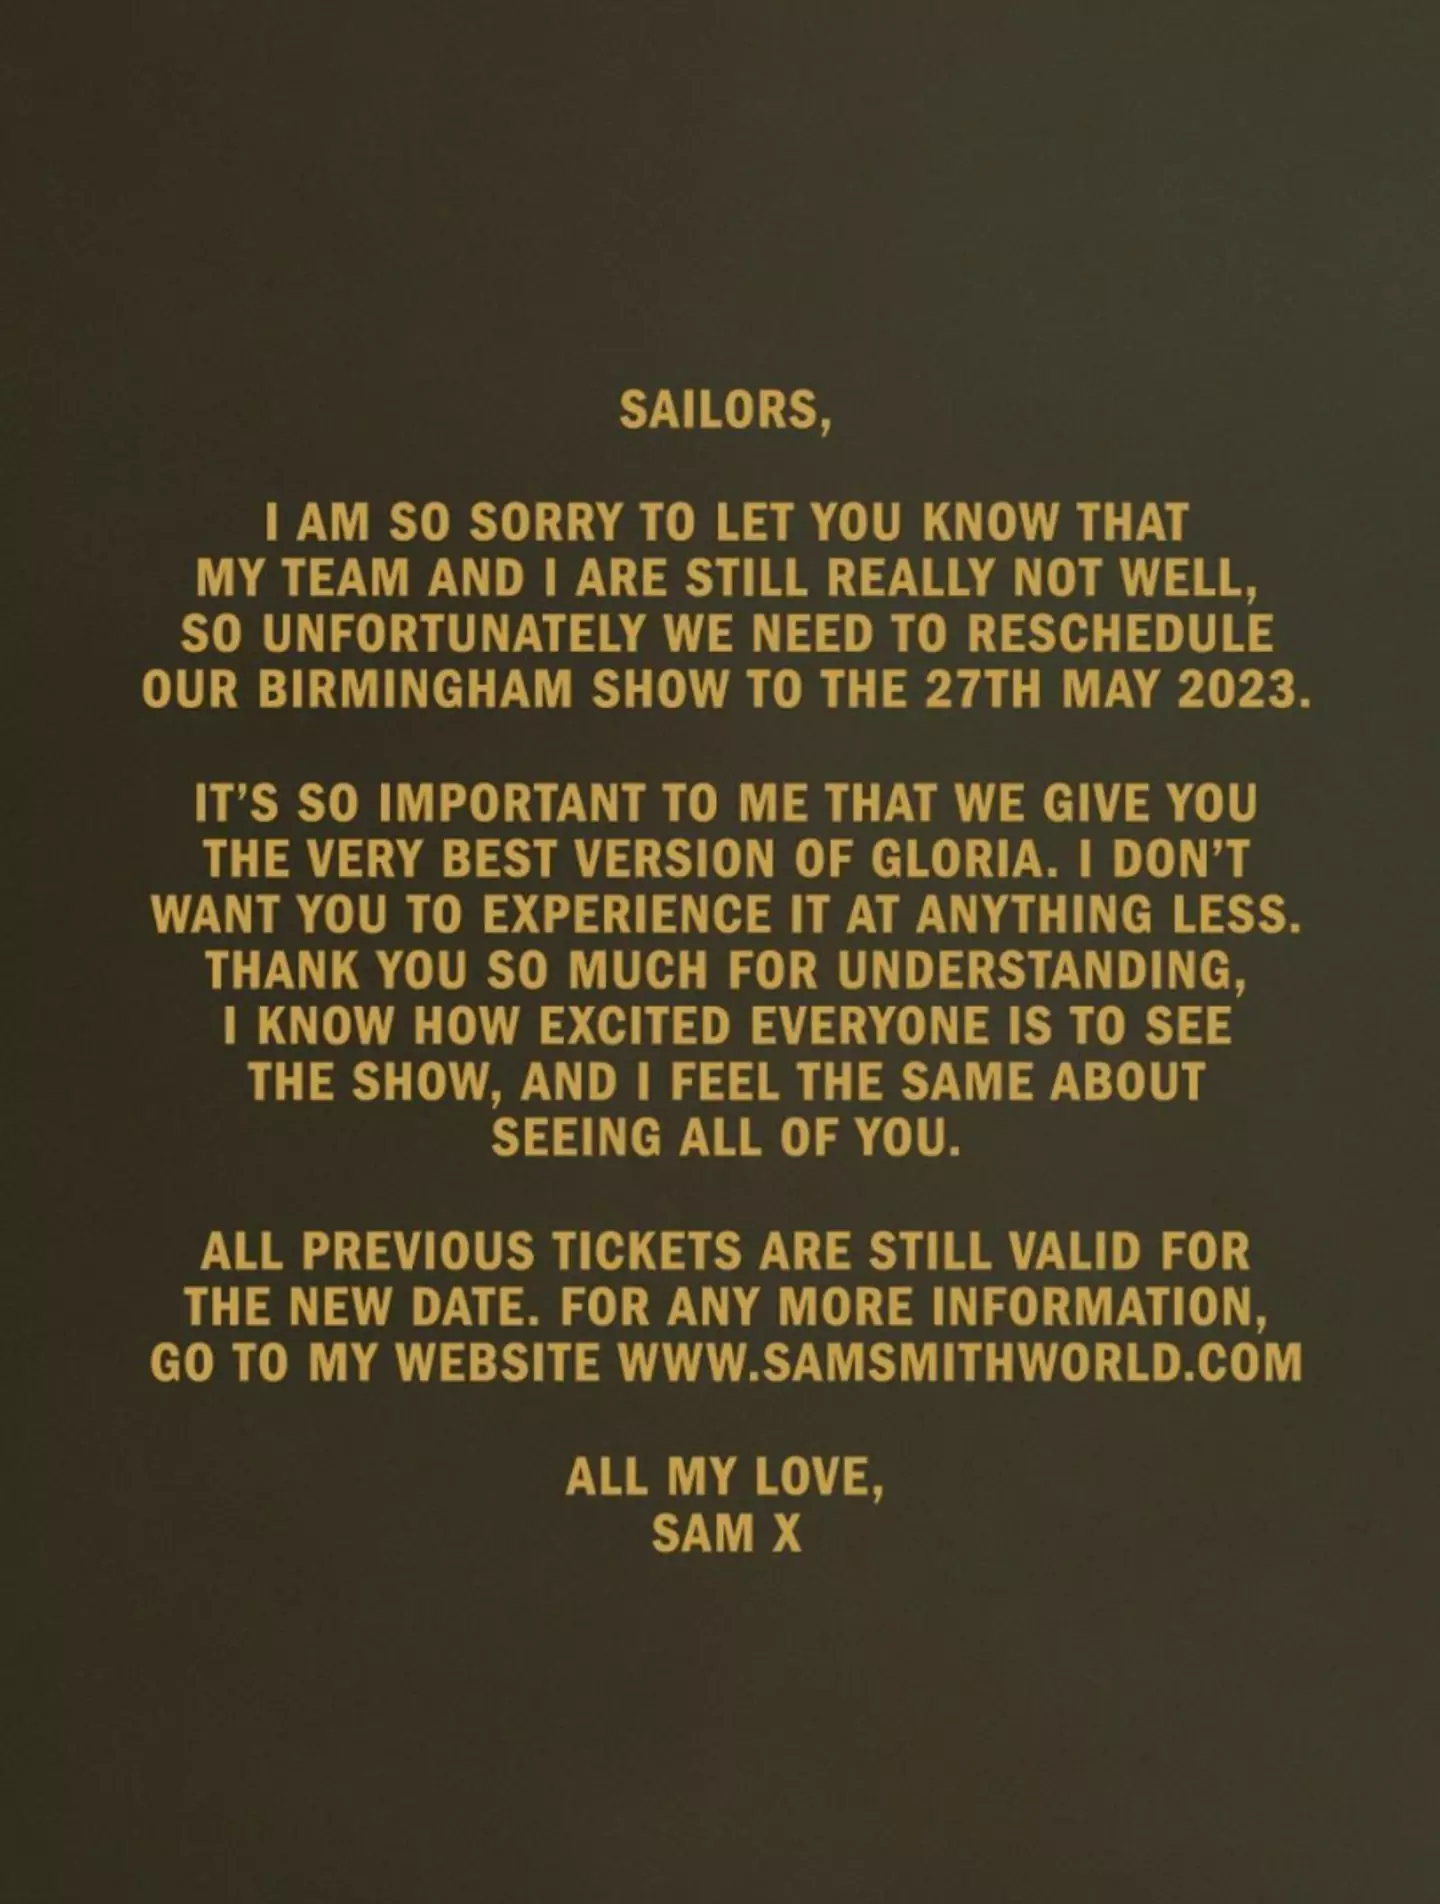 Sam announced that the gig will be rescheduled for 27 May.